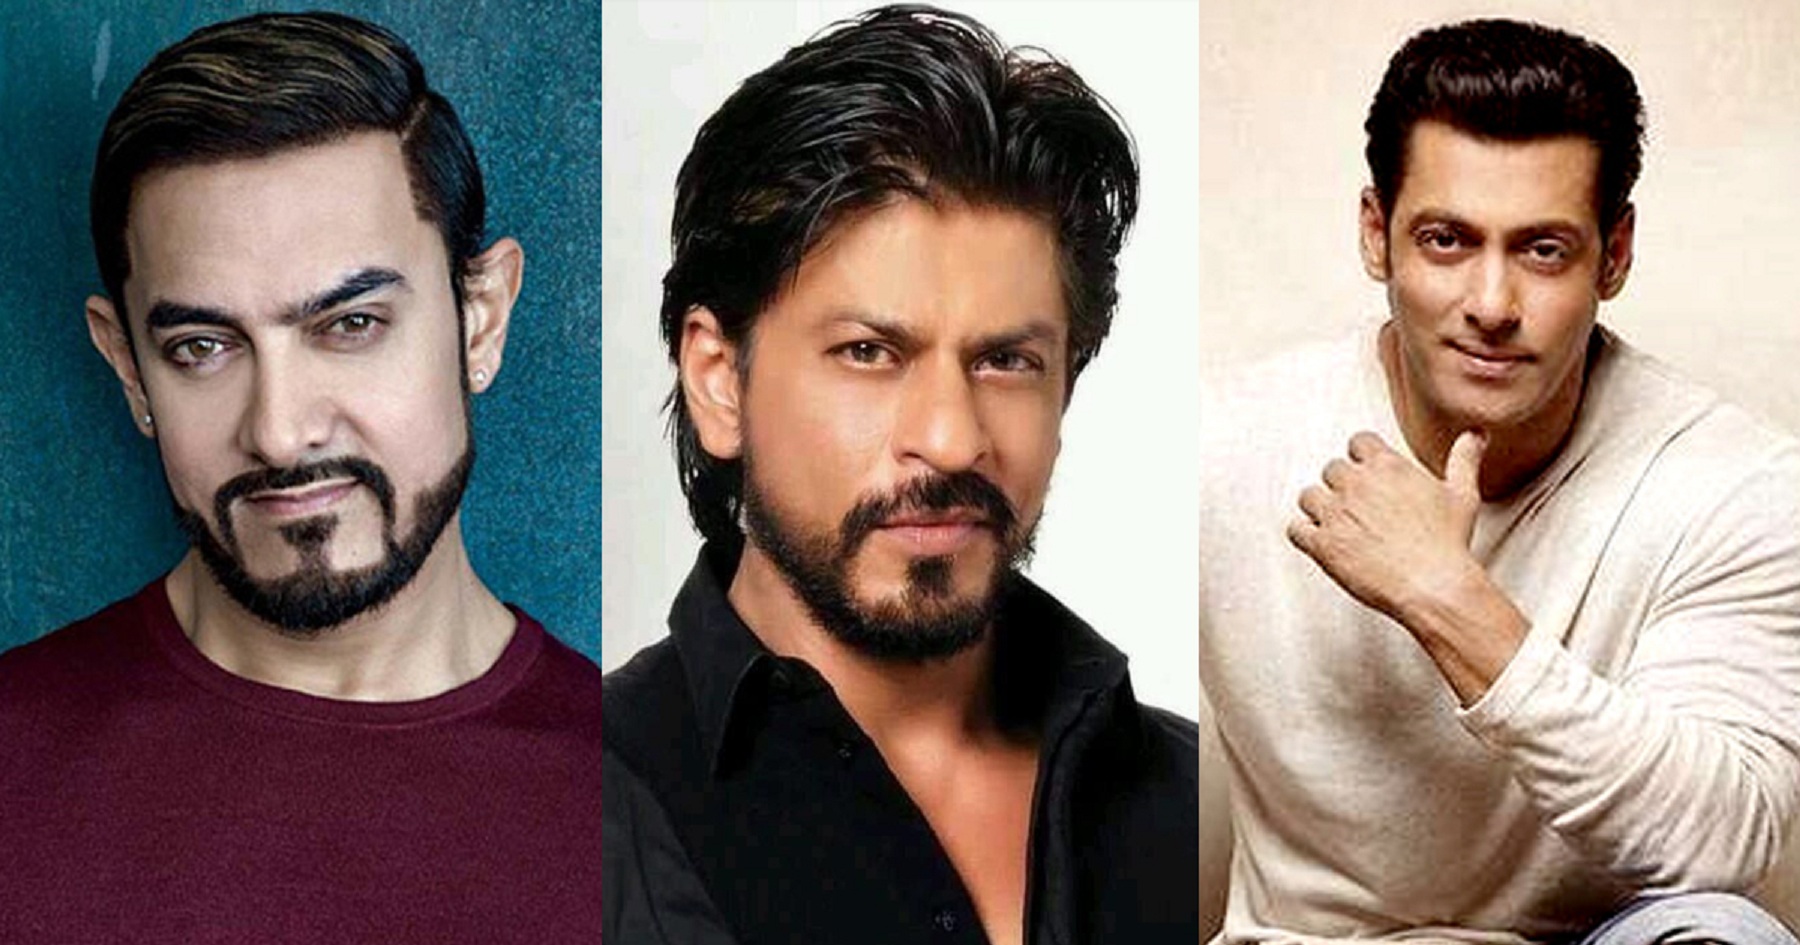 Shah Rukh, Salman or Aamir – Who is the ‘King Khan’ of Bollywood? Vote Here!